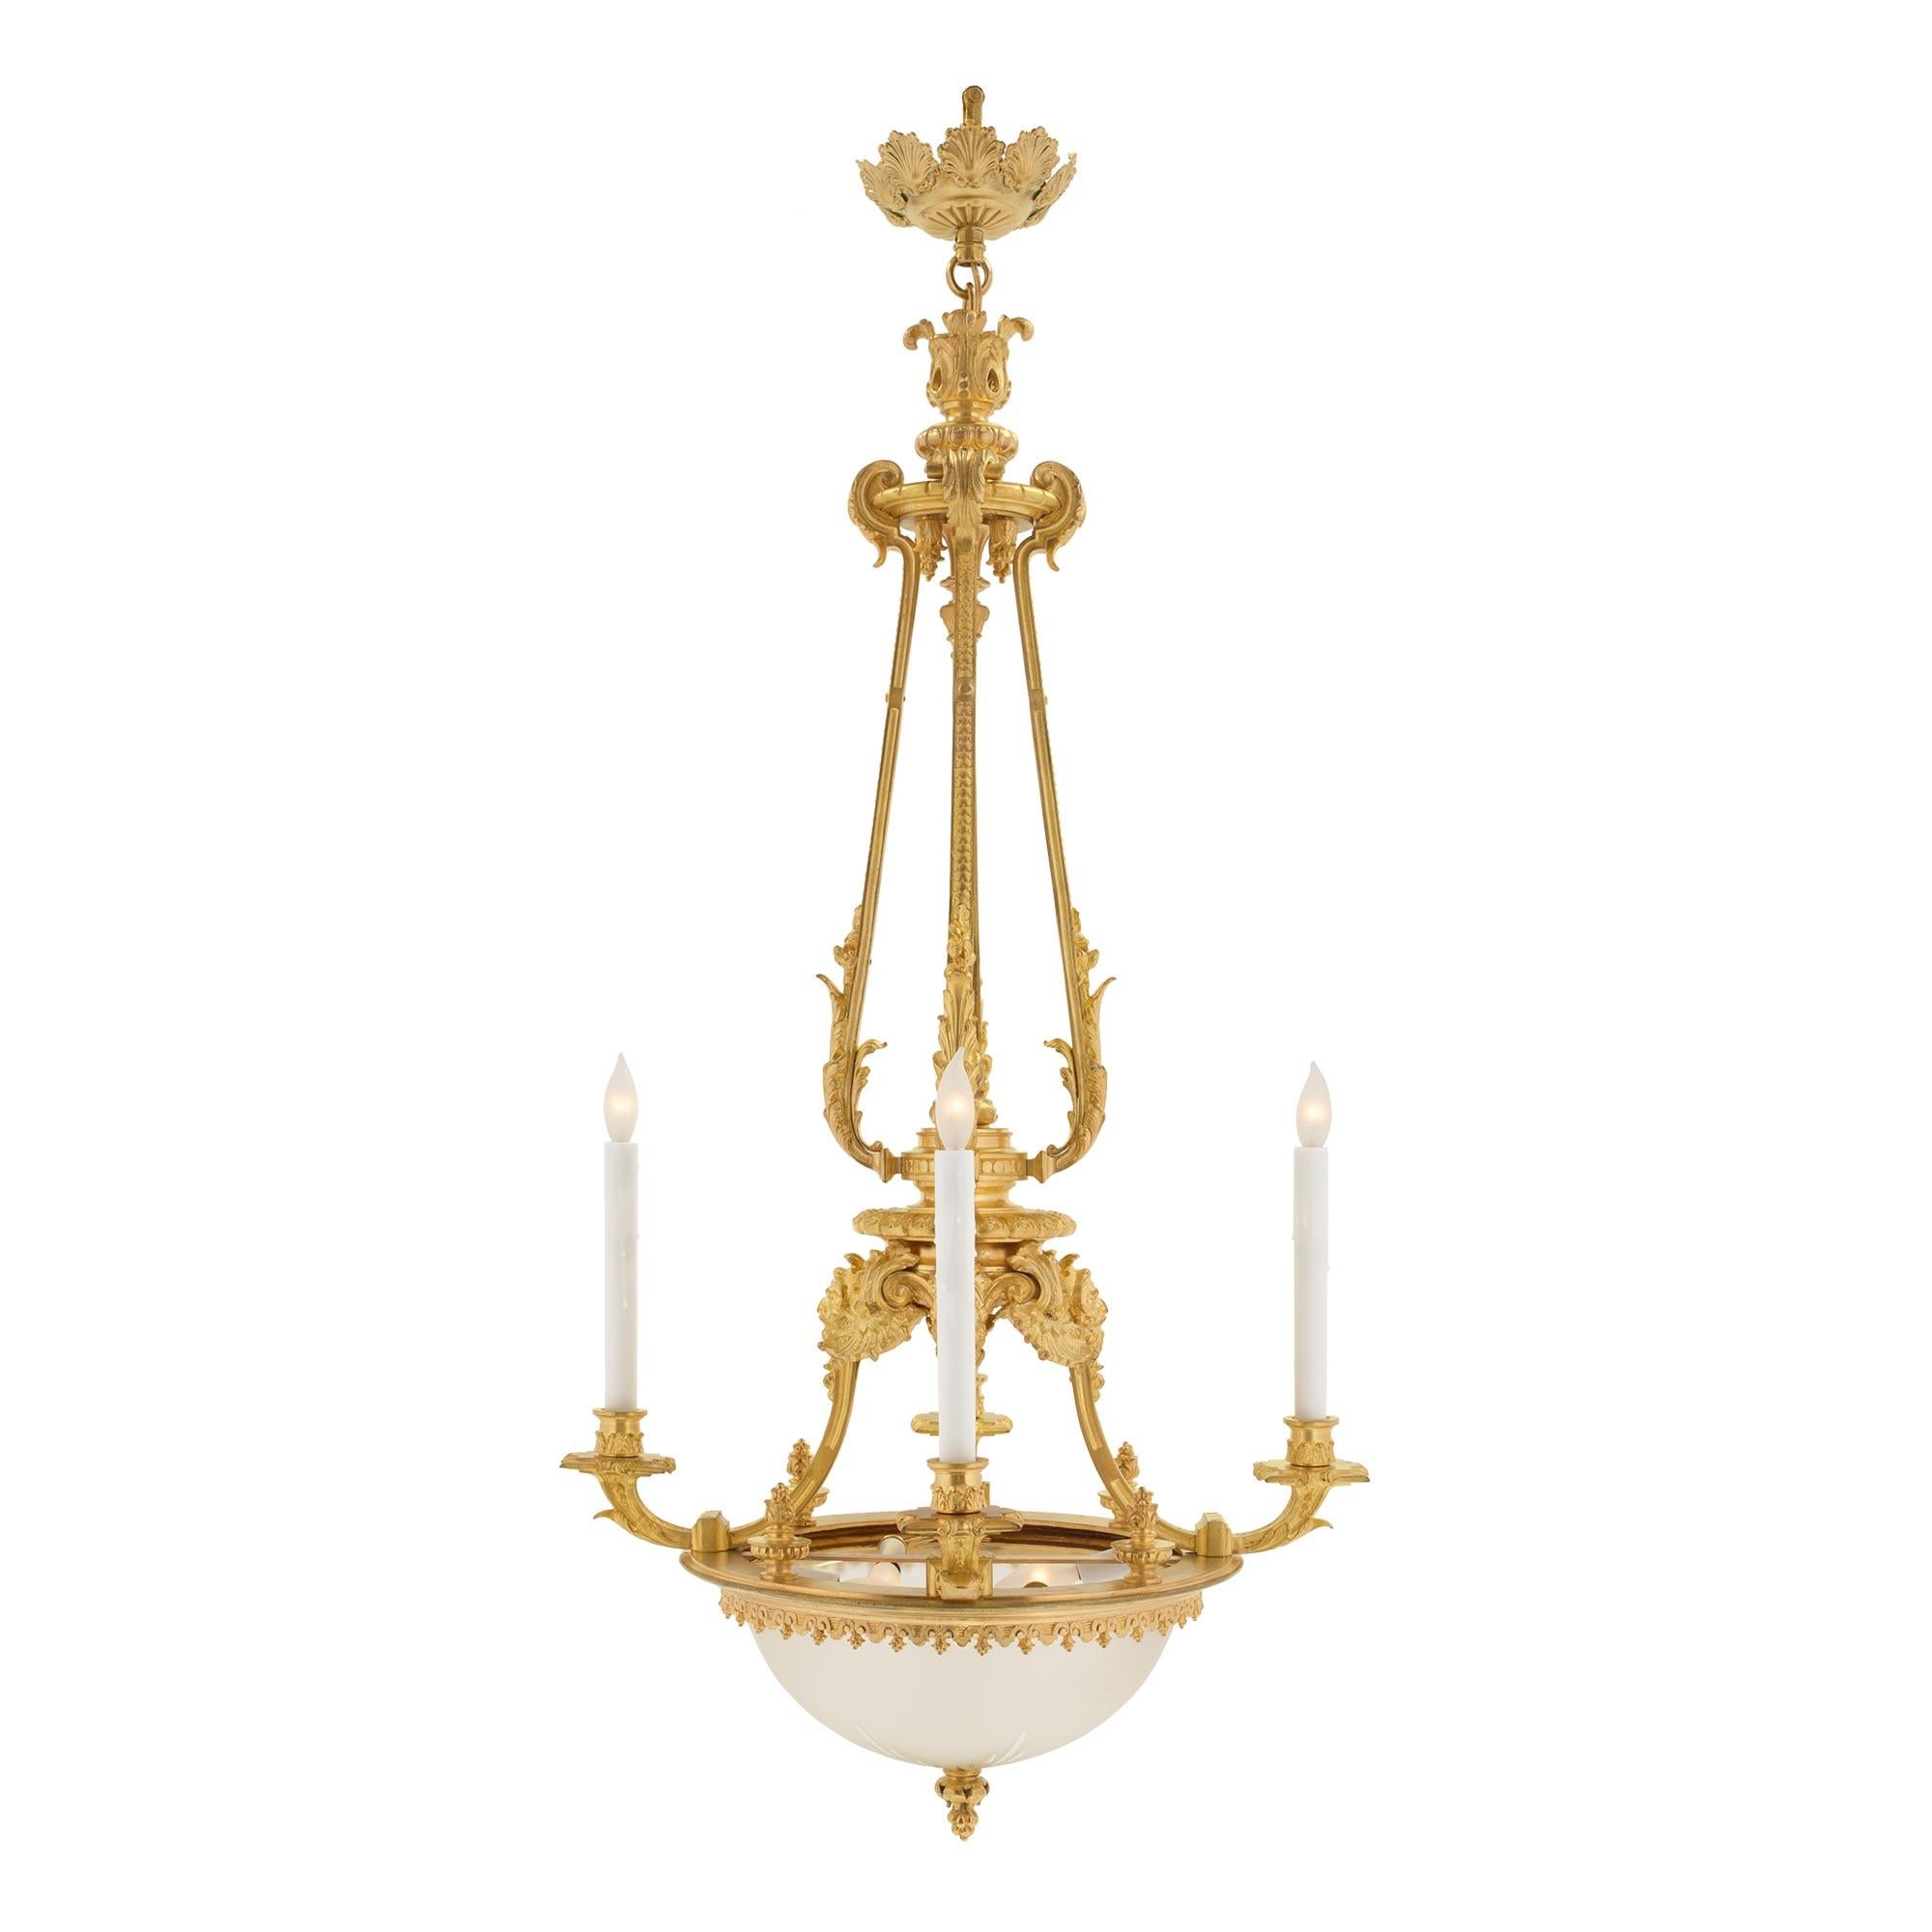 A stunning and most elegant French 19th century Louis XVI st. ormolu four arm, eight light chandelier. The chandelier is centered by a fine ormolu foliate finial below the original stunning and most decorative etched and cut glass bowl which is